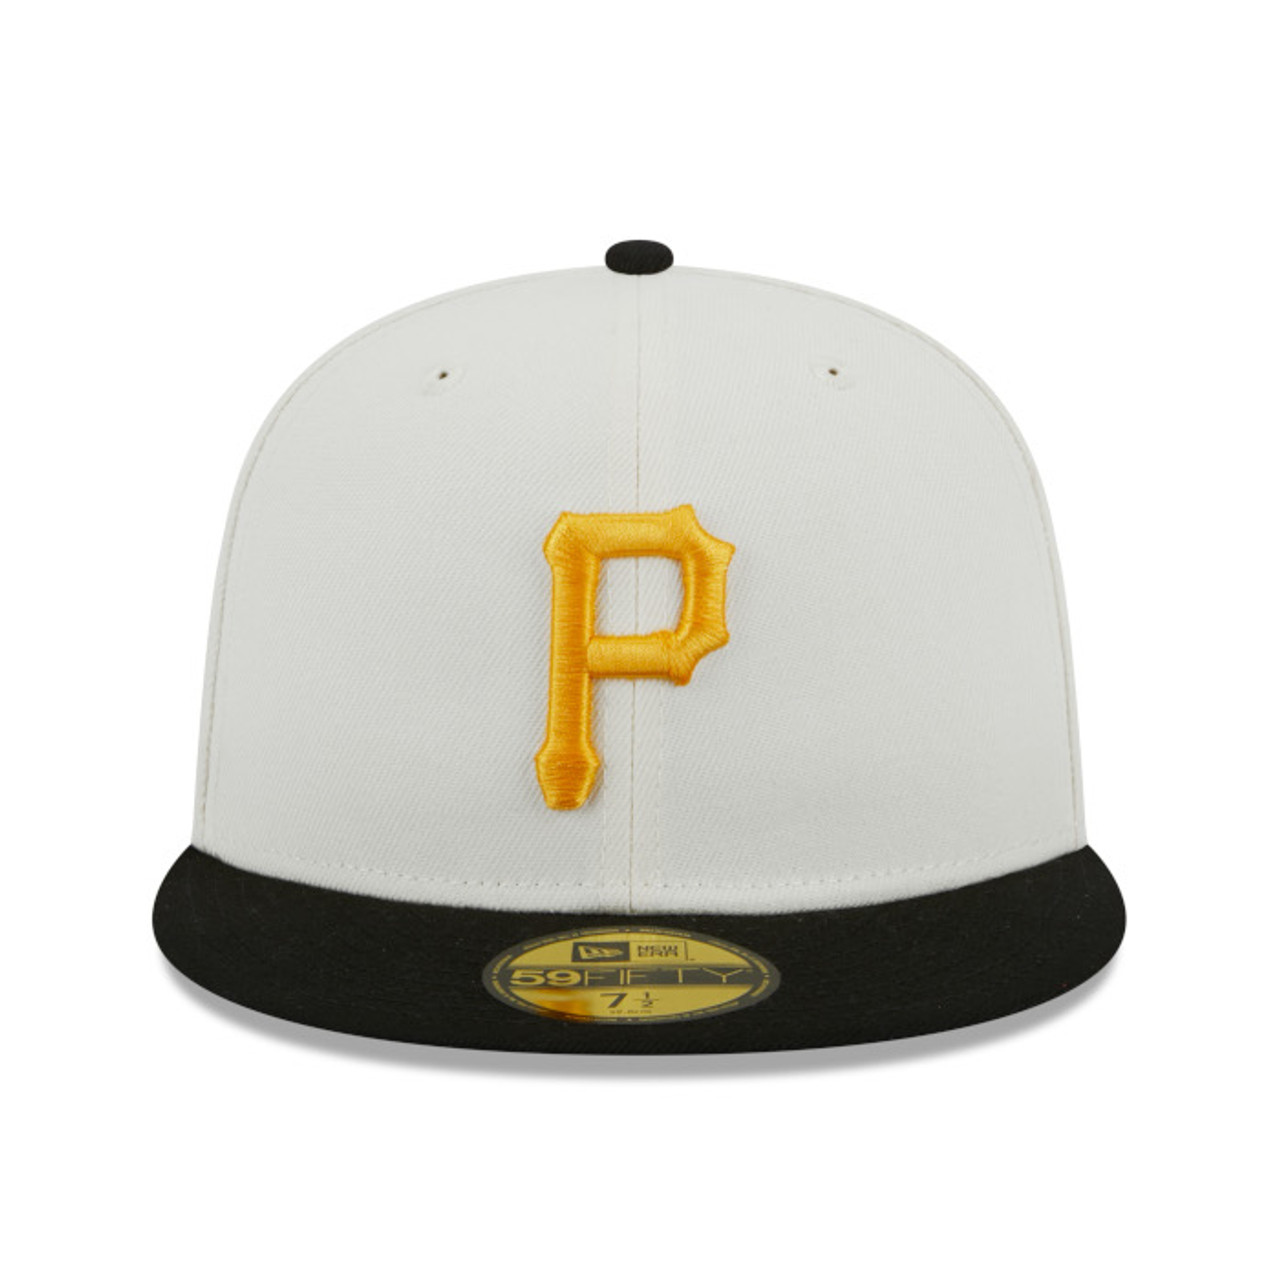 PITTSBURGH PIRATES VINTAGE 80s ROMAN THROWBACK LEATHER MLB FITTED HAT SIZE  7 1/4